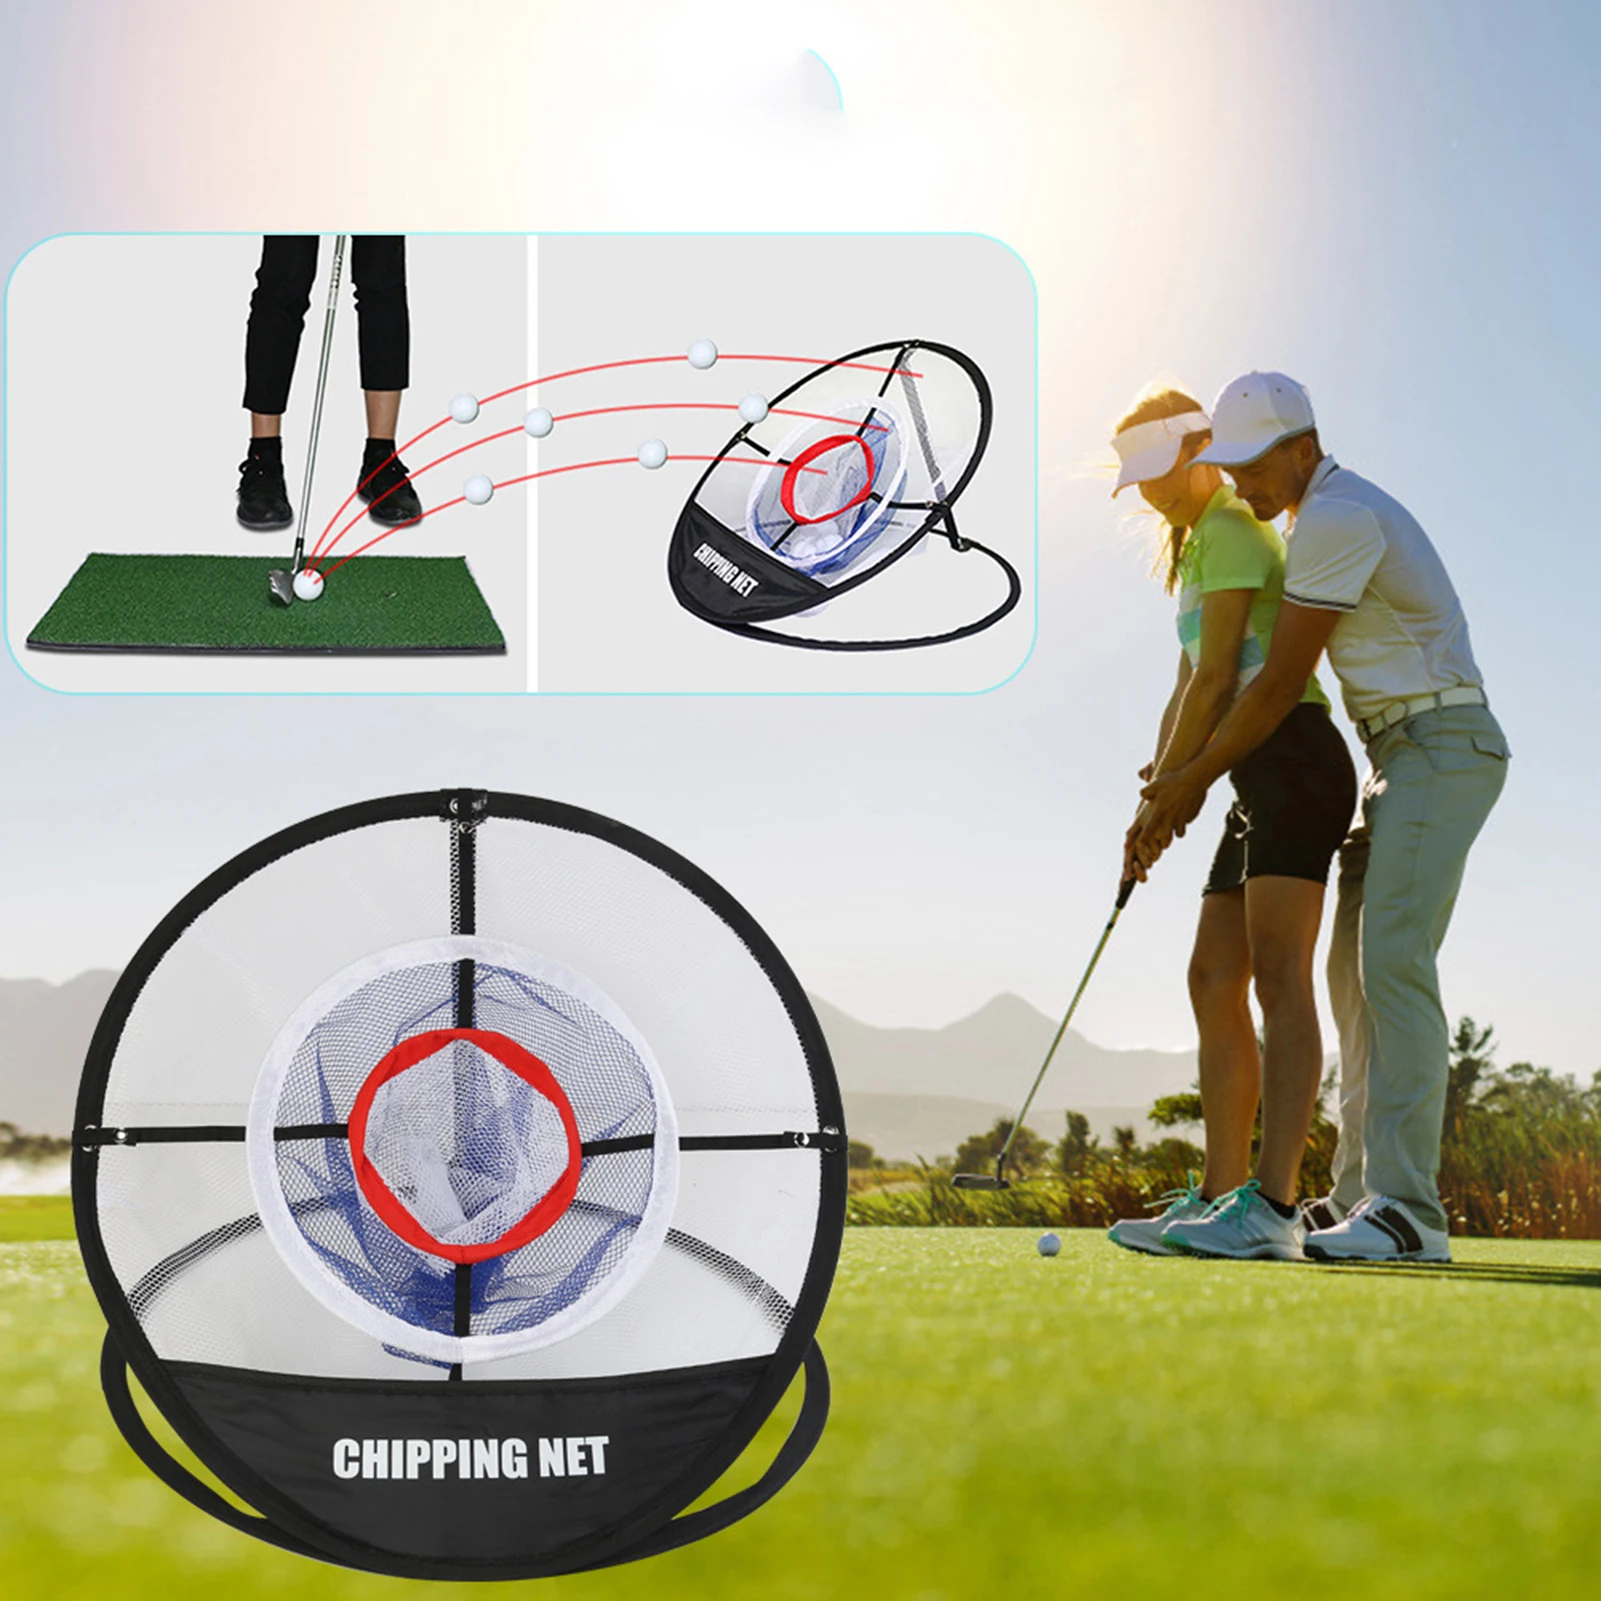 

New Golf Pop UP Indoor Outdoor Chipping Pitching Cages Mats Practice Easy Net Golf Training Aids Metal Net Set